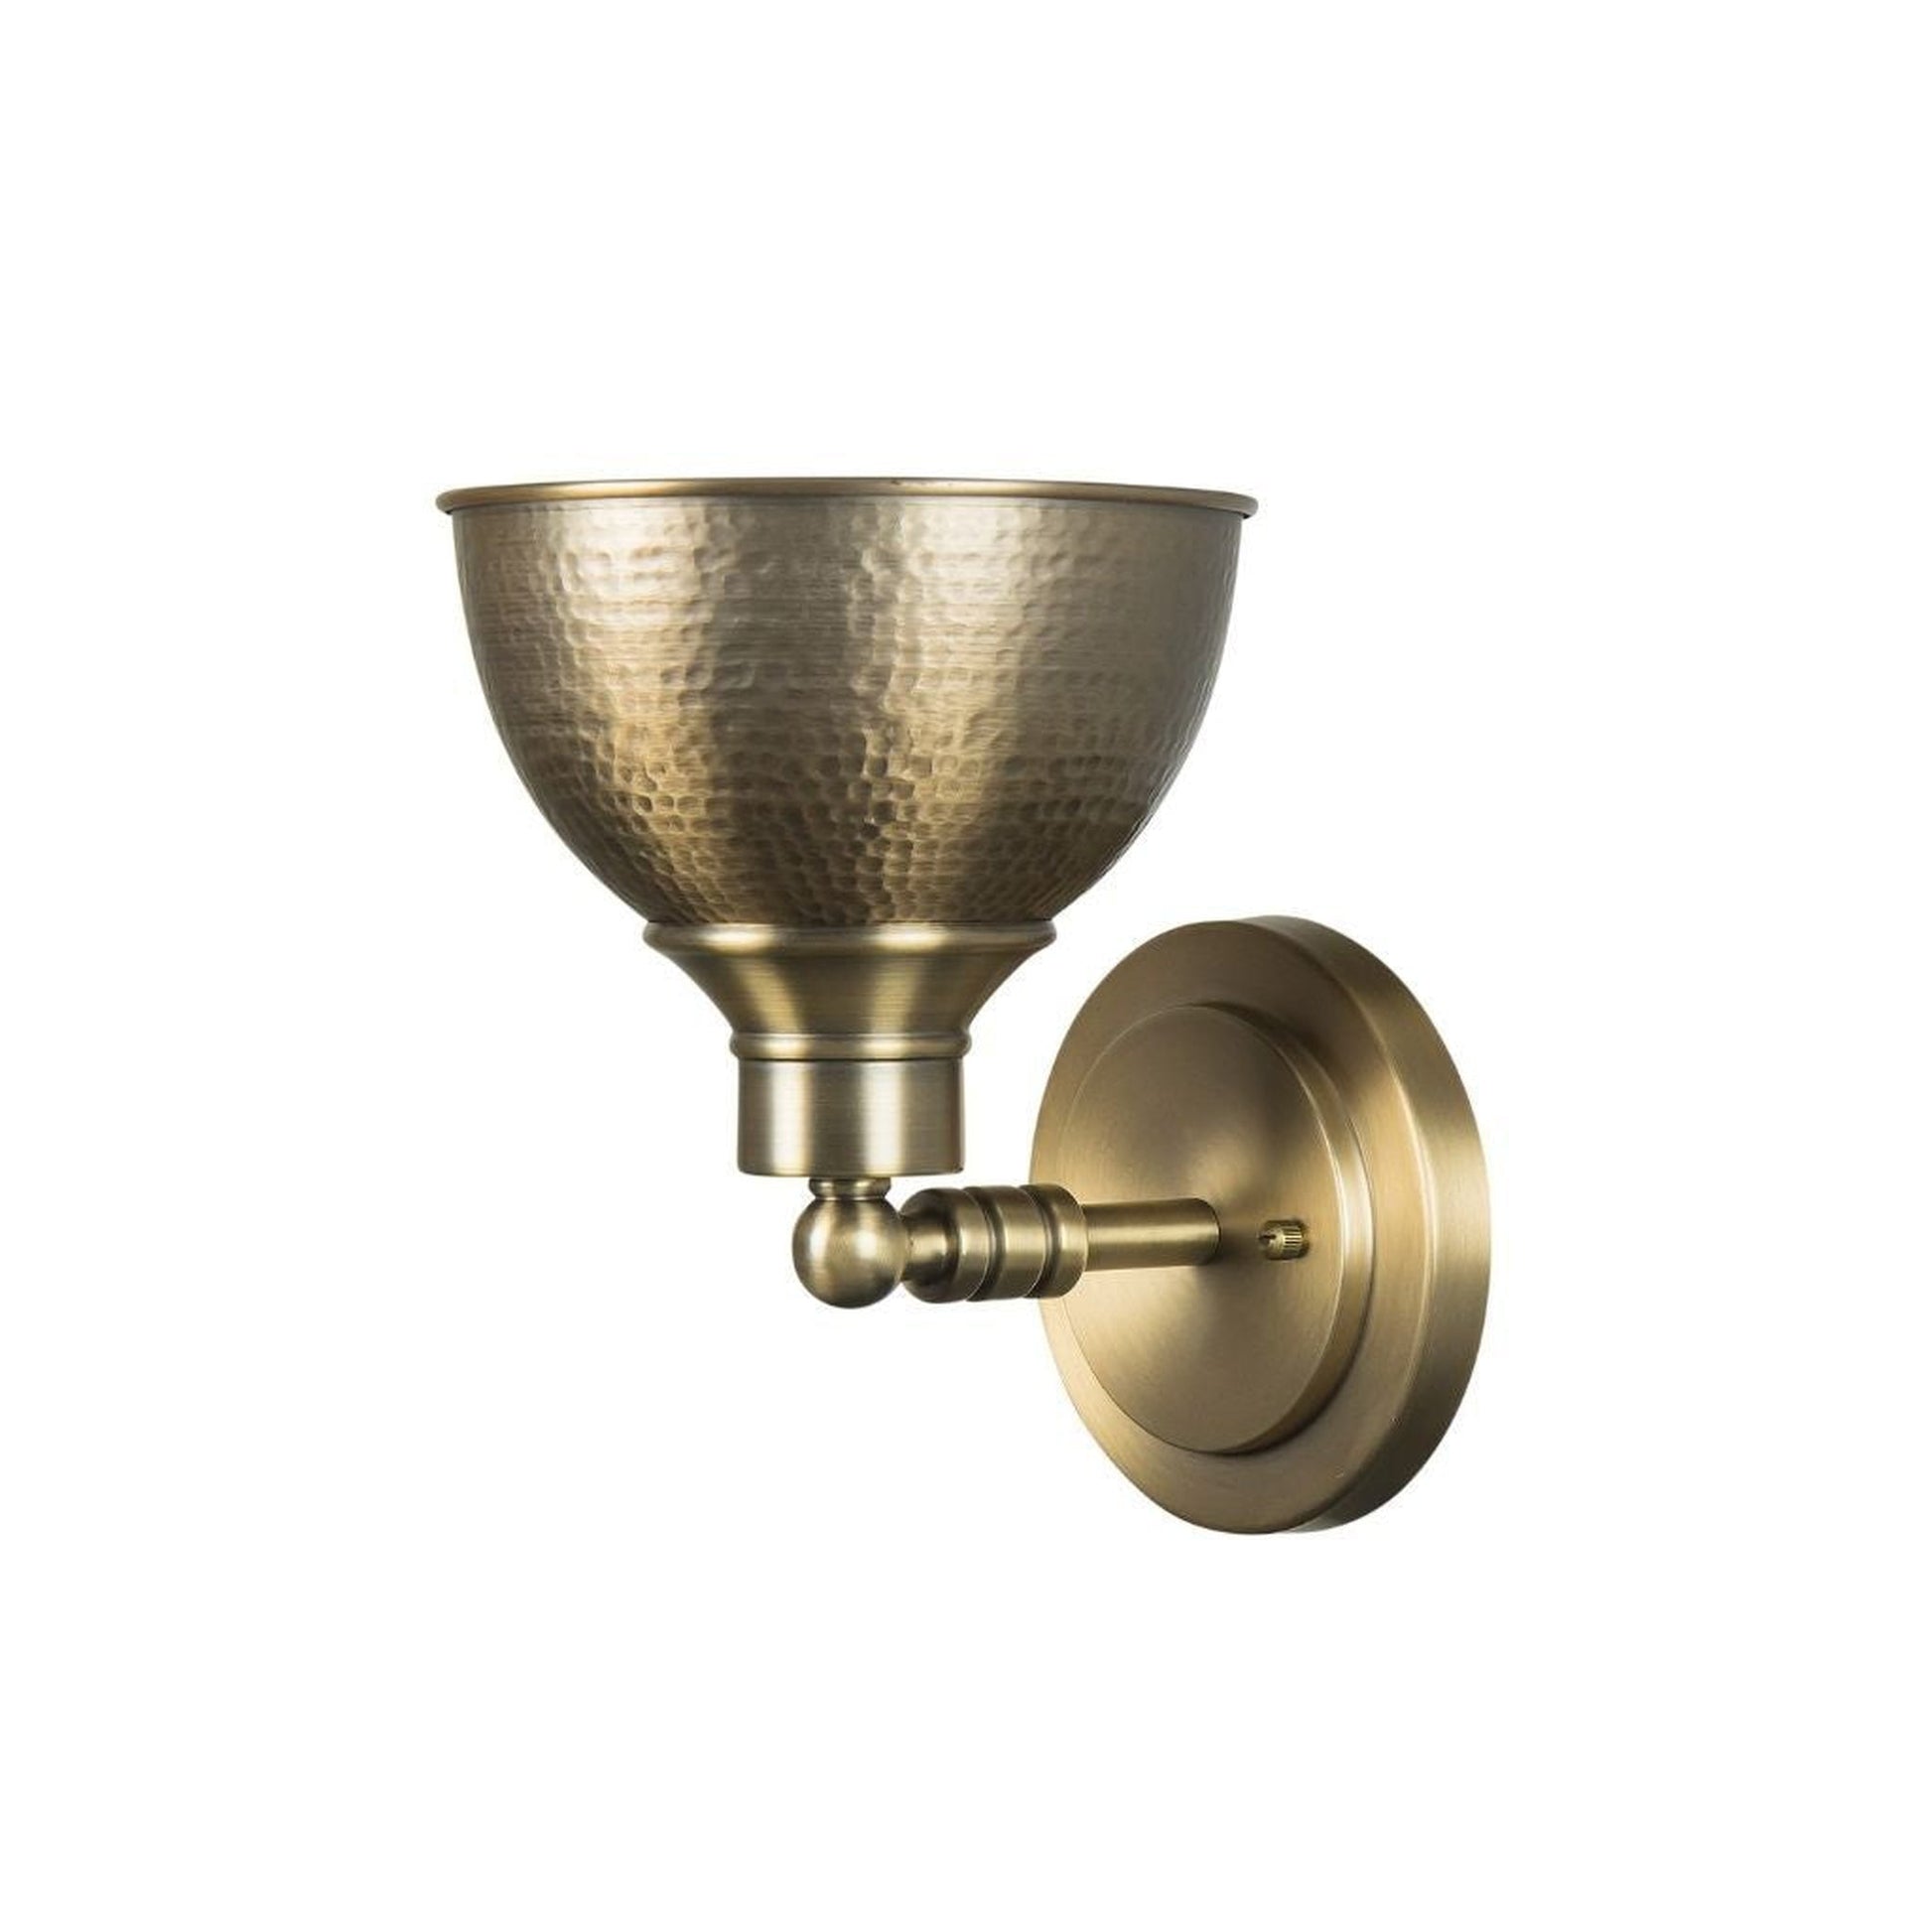 Craftmade Timarron 8" x 10" 1-Light Legacy Brass Wall Sconce With Hammered Metal Shade